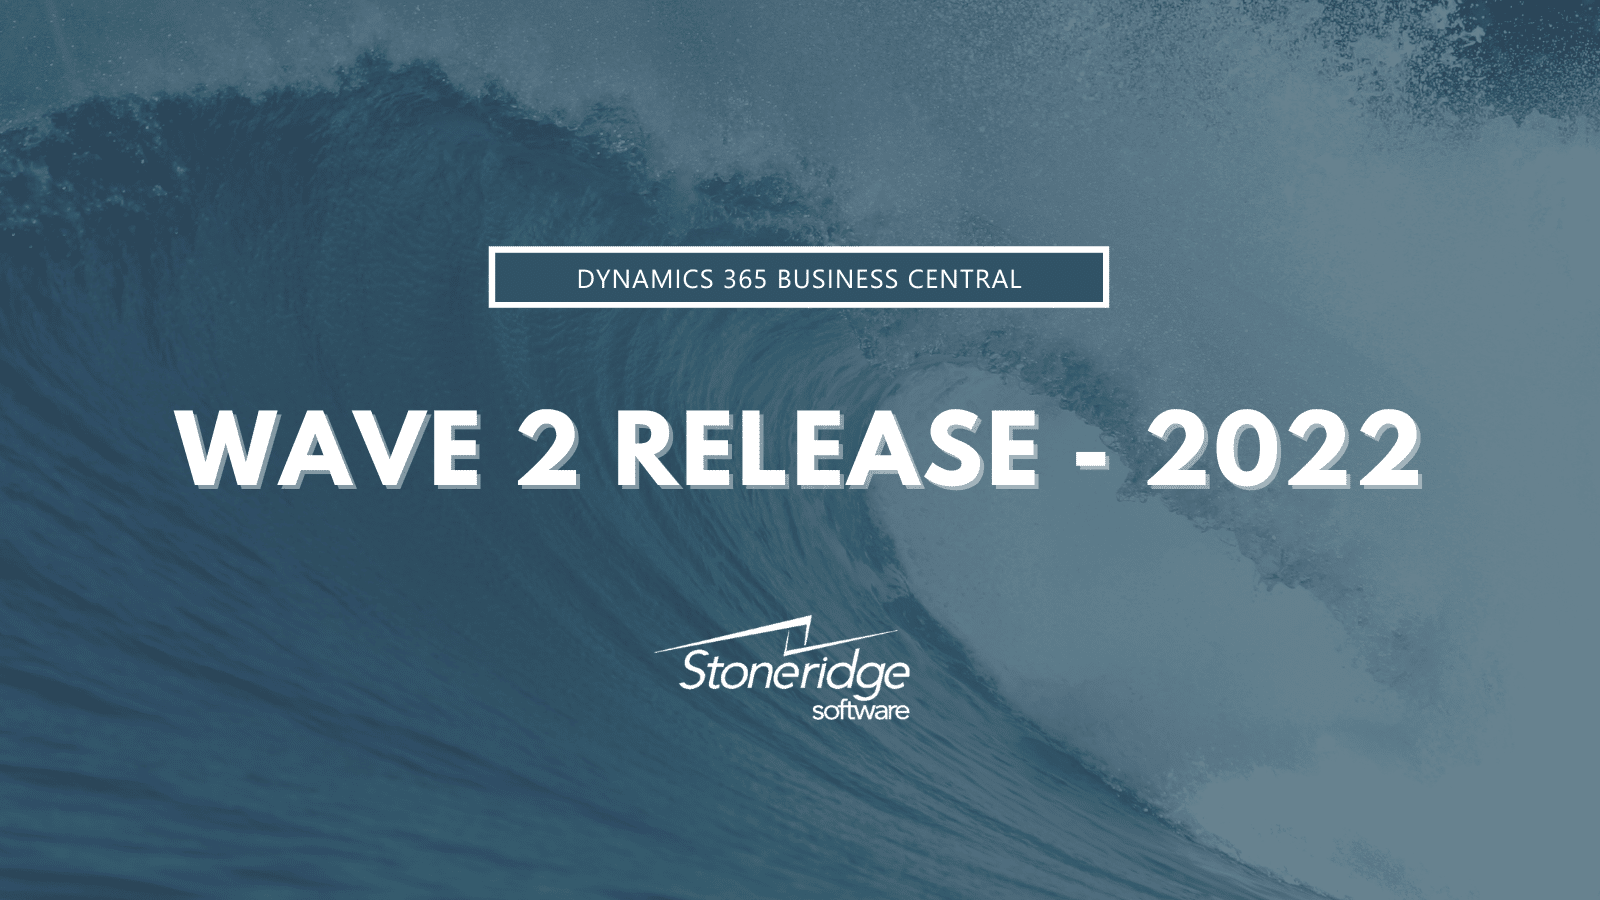 Dynamics 365 Business Central Wave 2 Release 2022